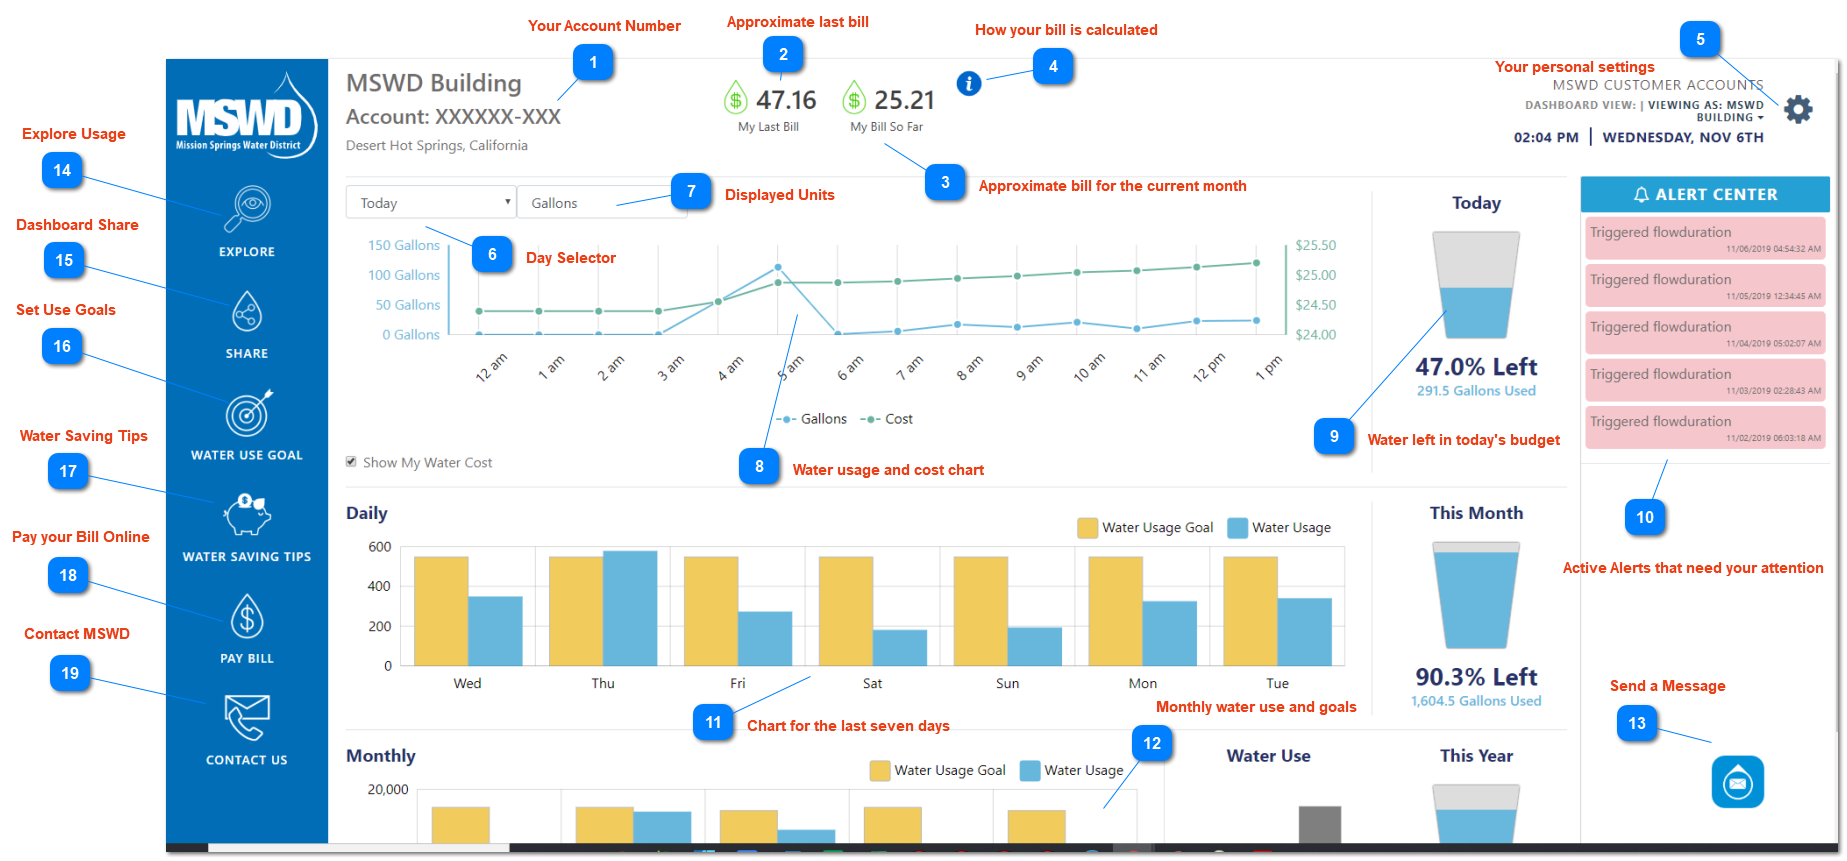 1. MSWD Dashboard Overview